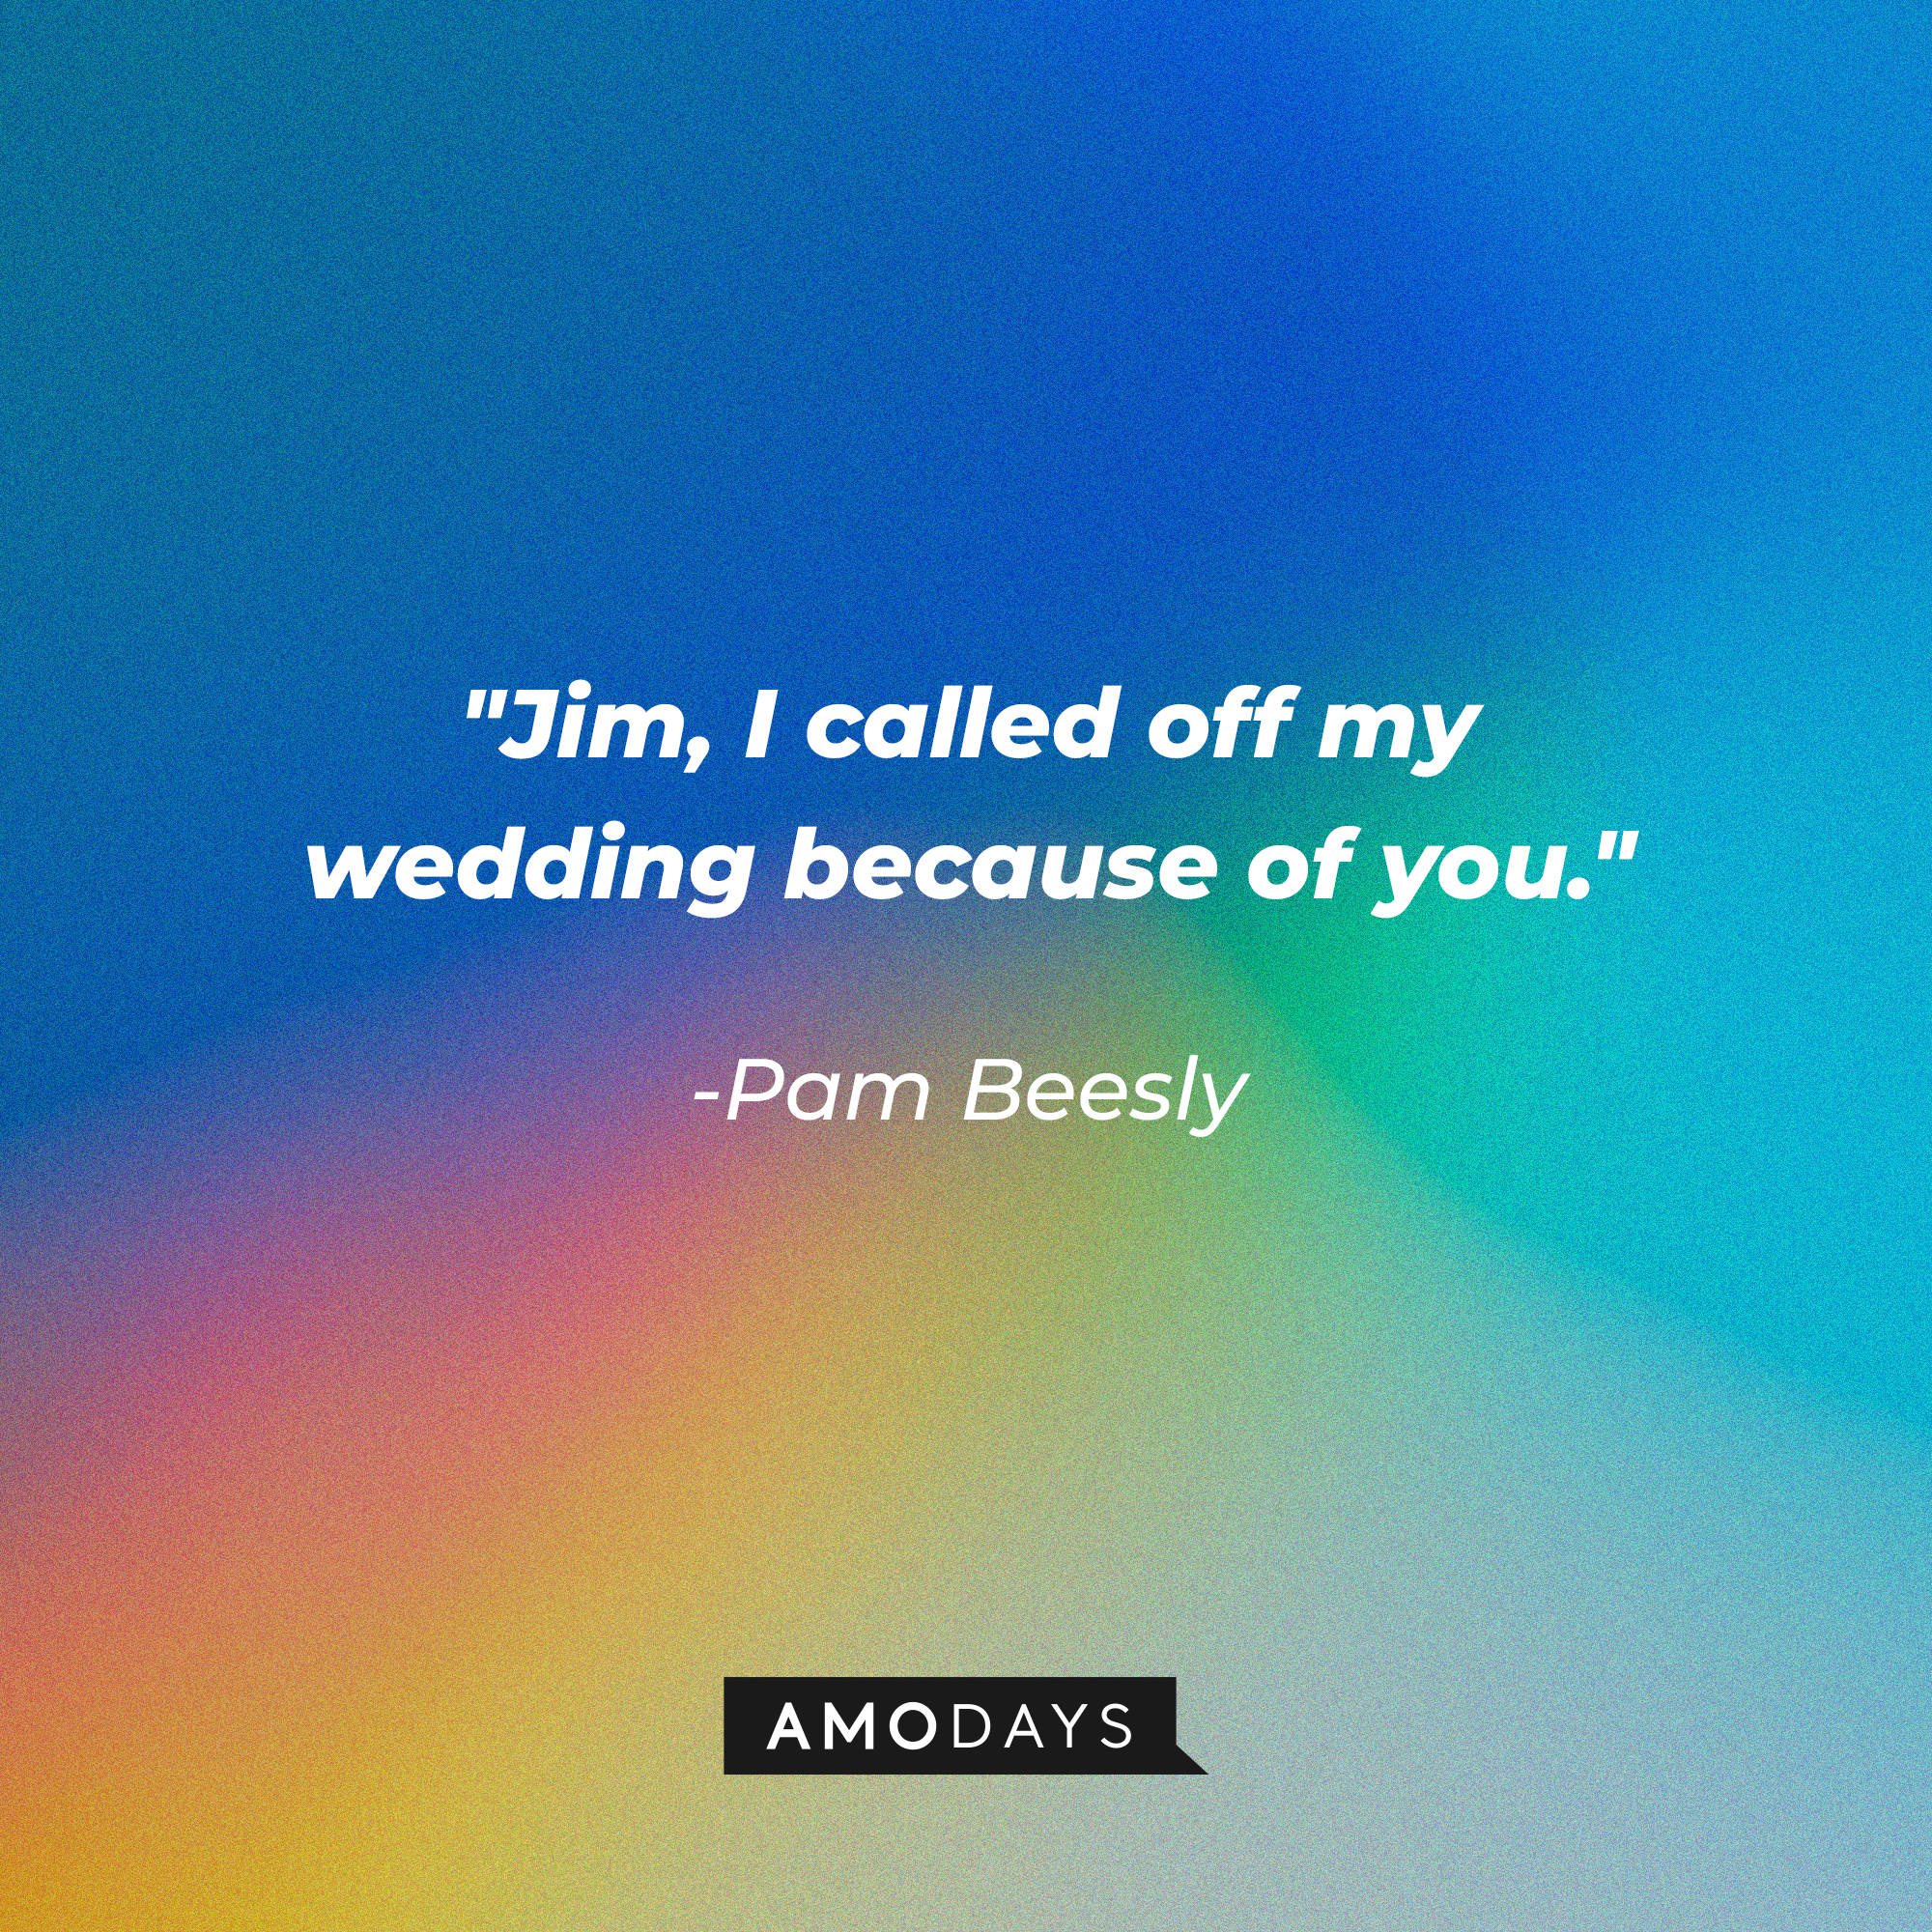 Pam Beesly’s quote: "Jim, I called off my wedding because of you." | Image: AmoDays